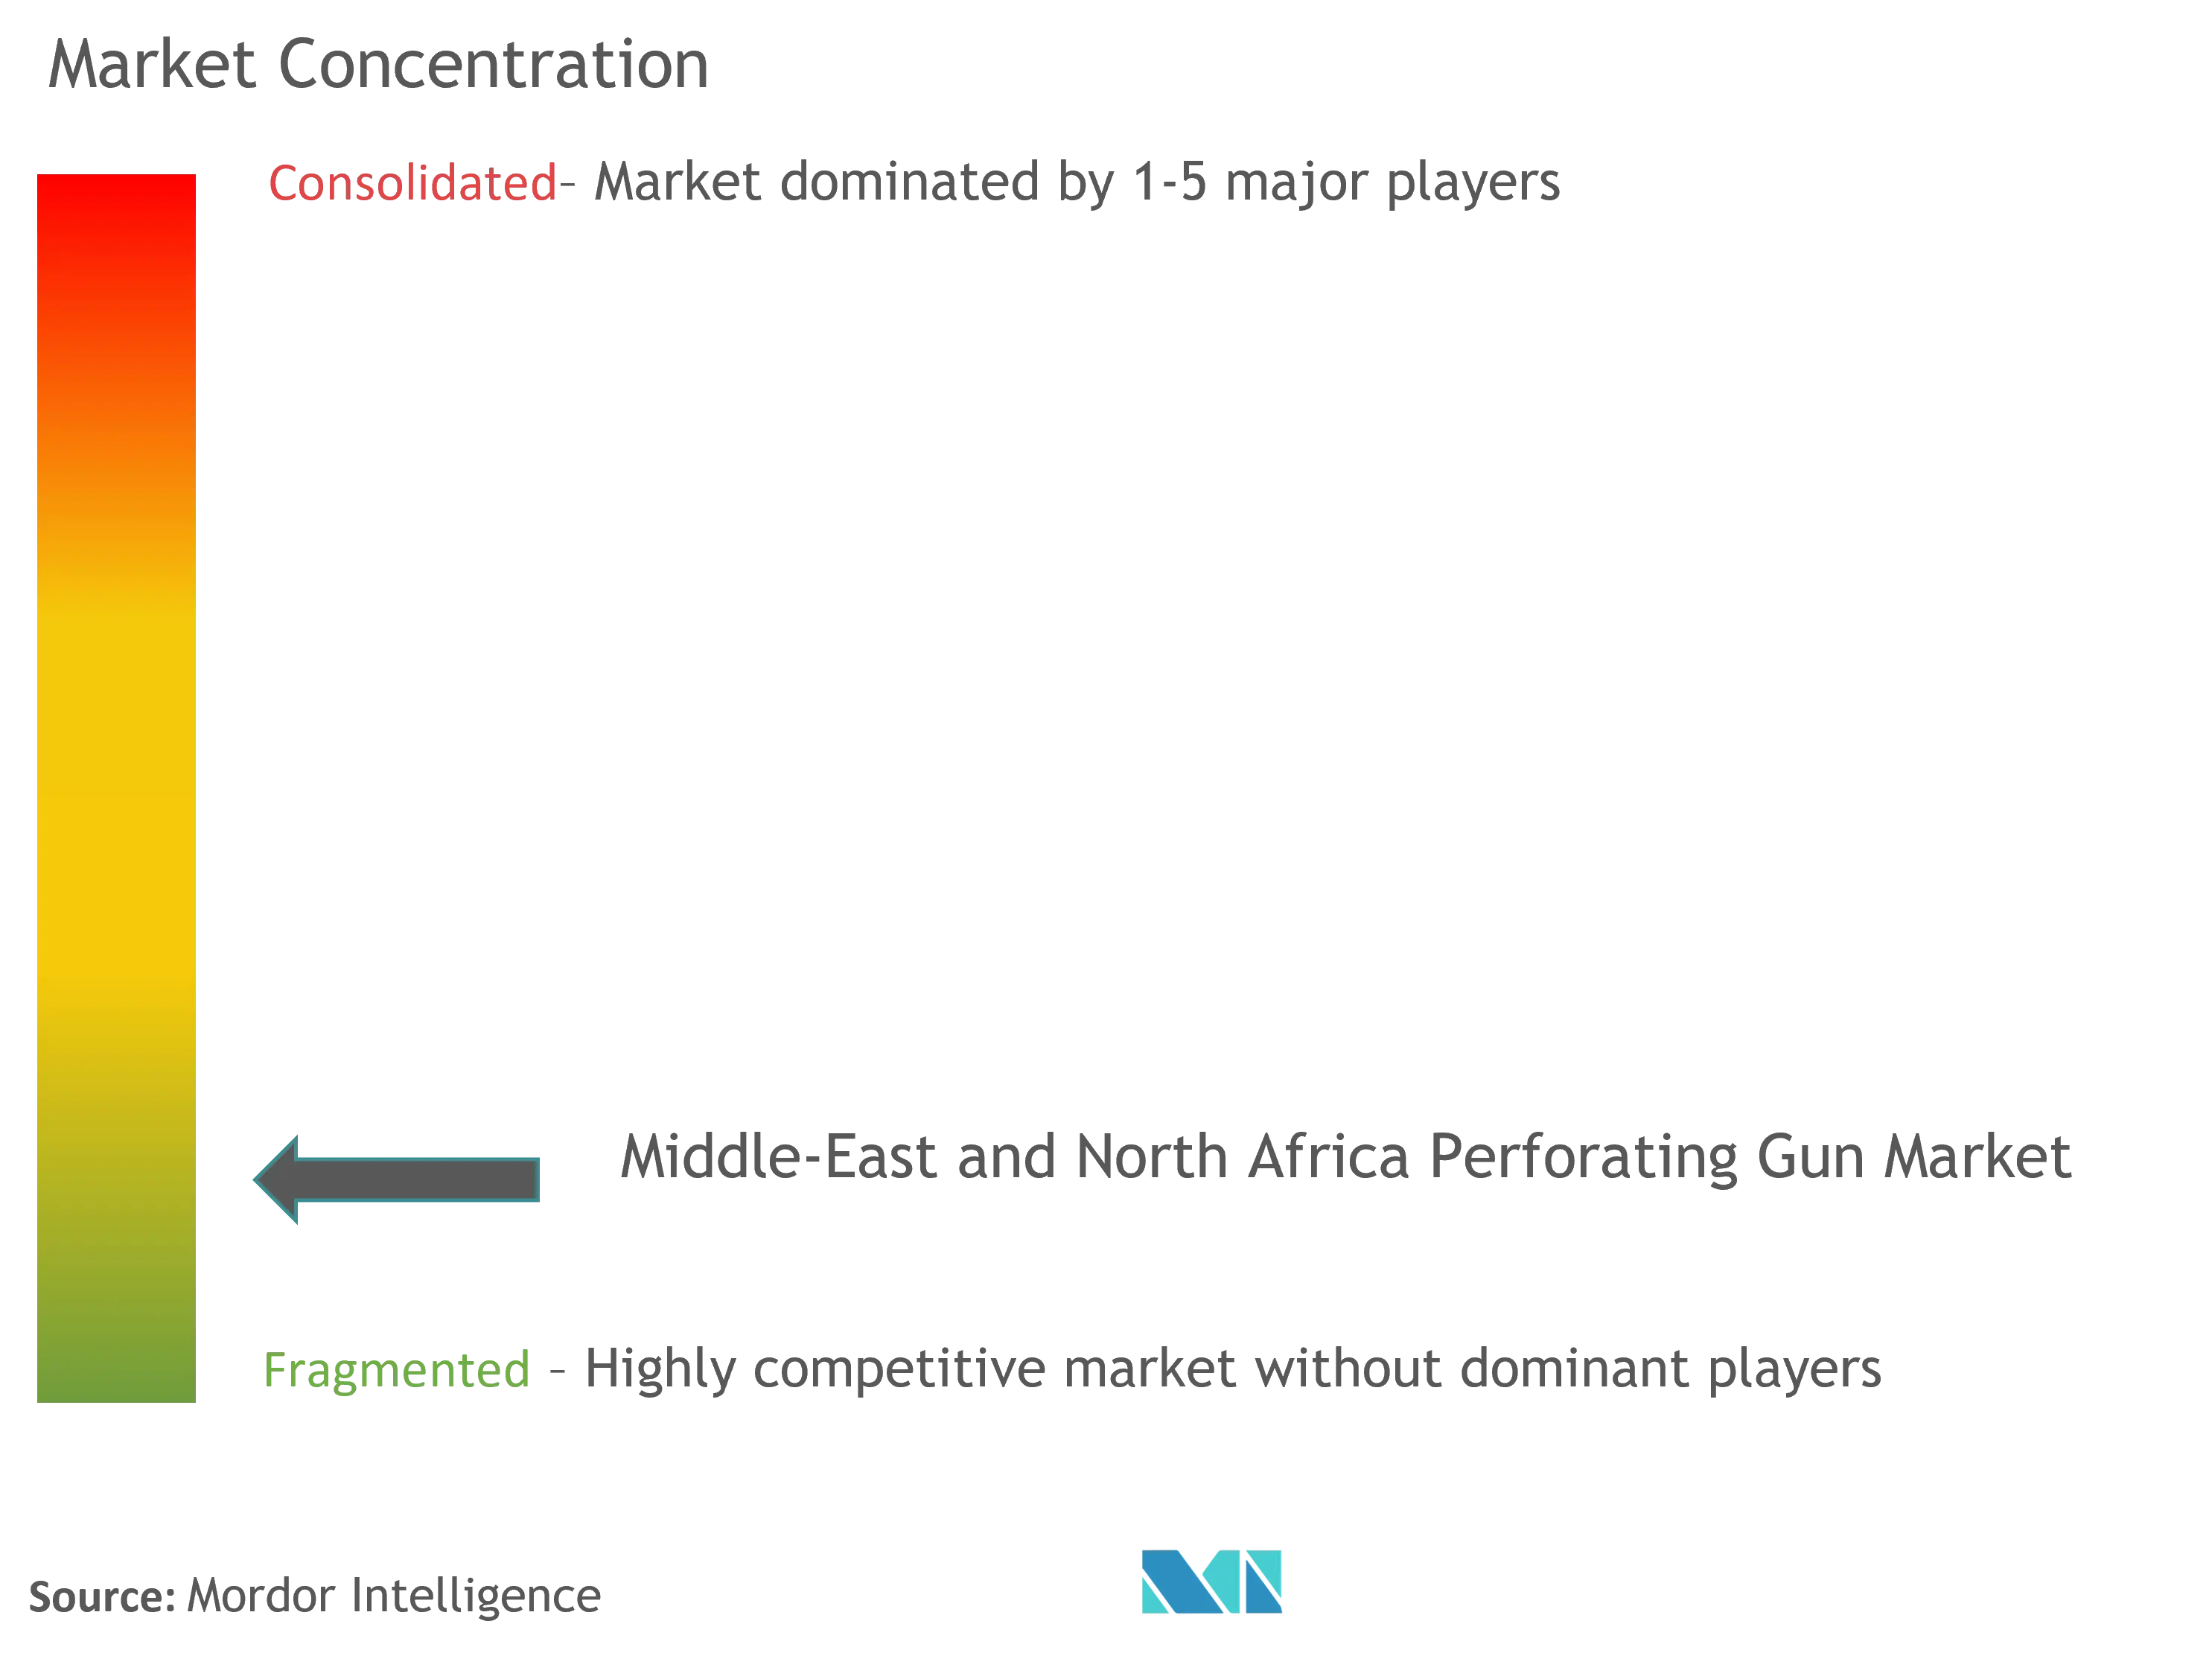 Middle East and North Africa Perforating Gun Market Concentration